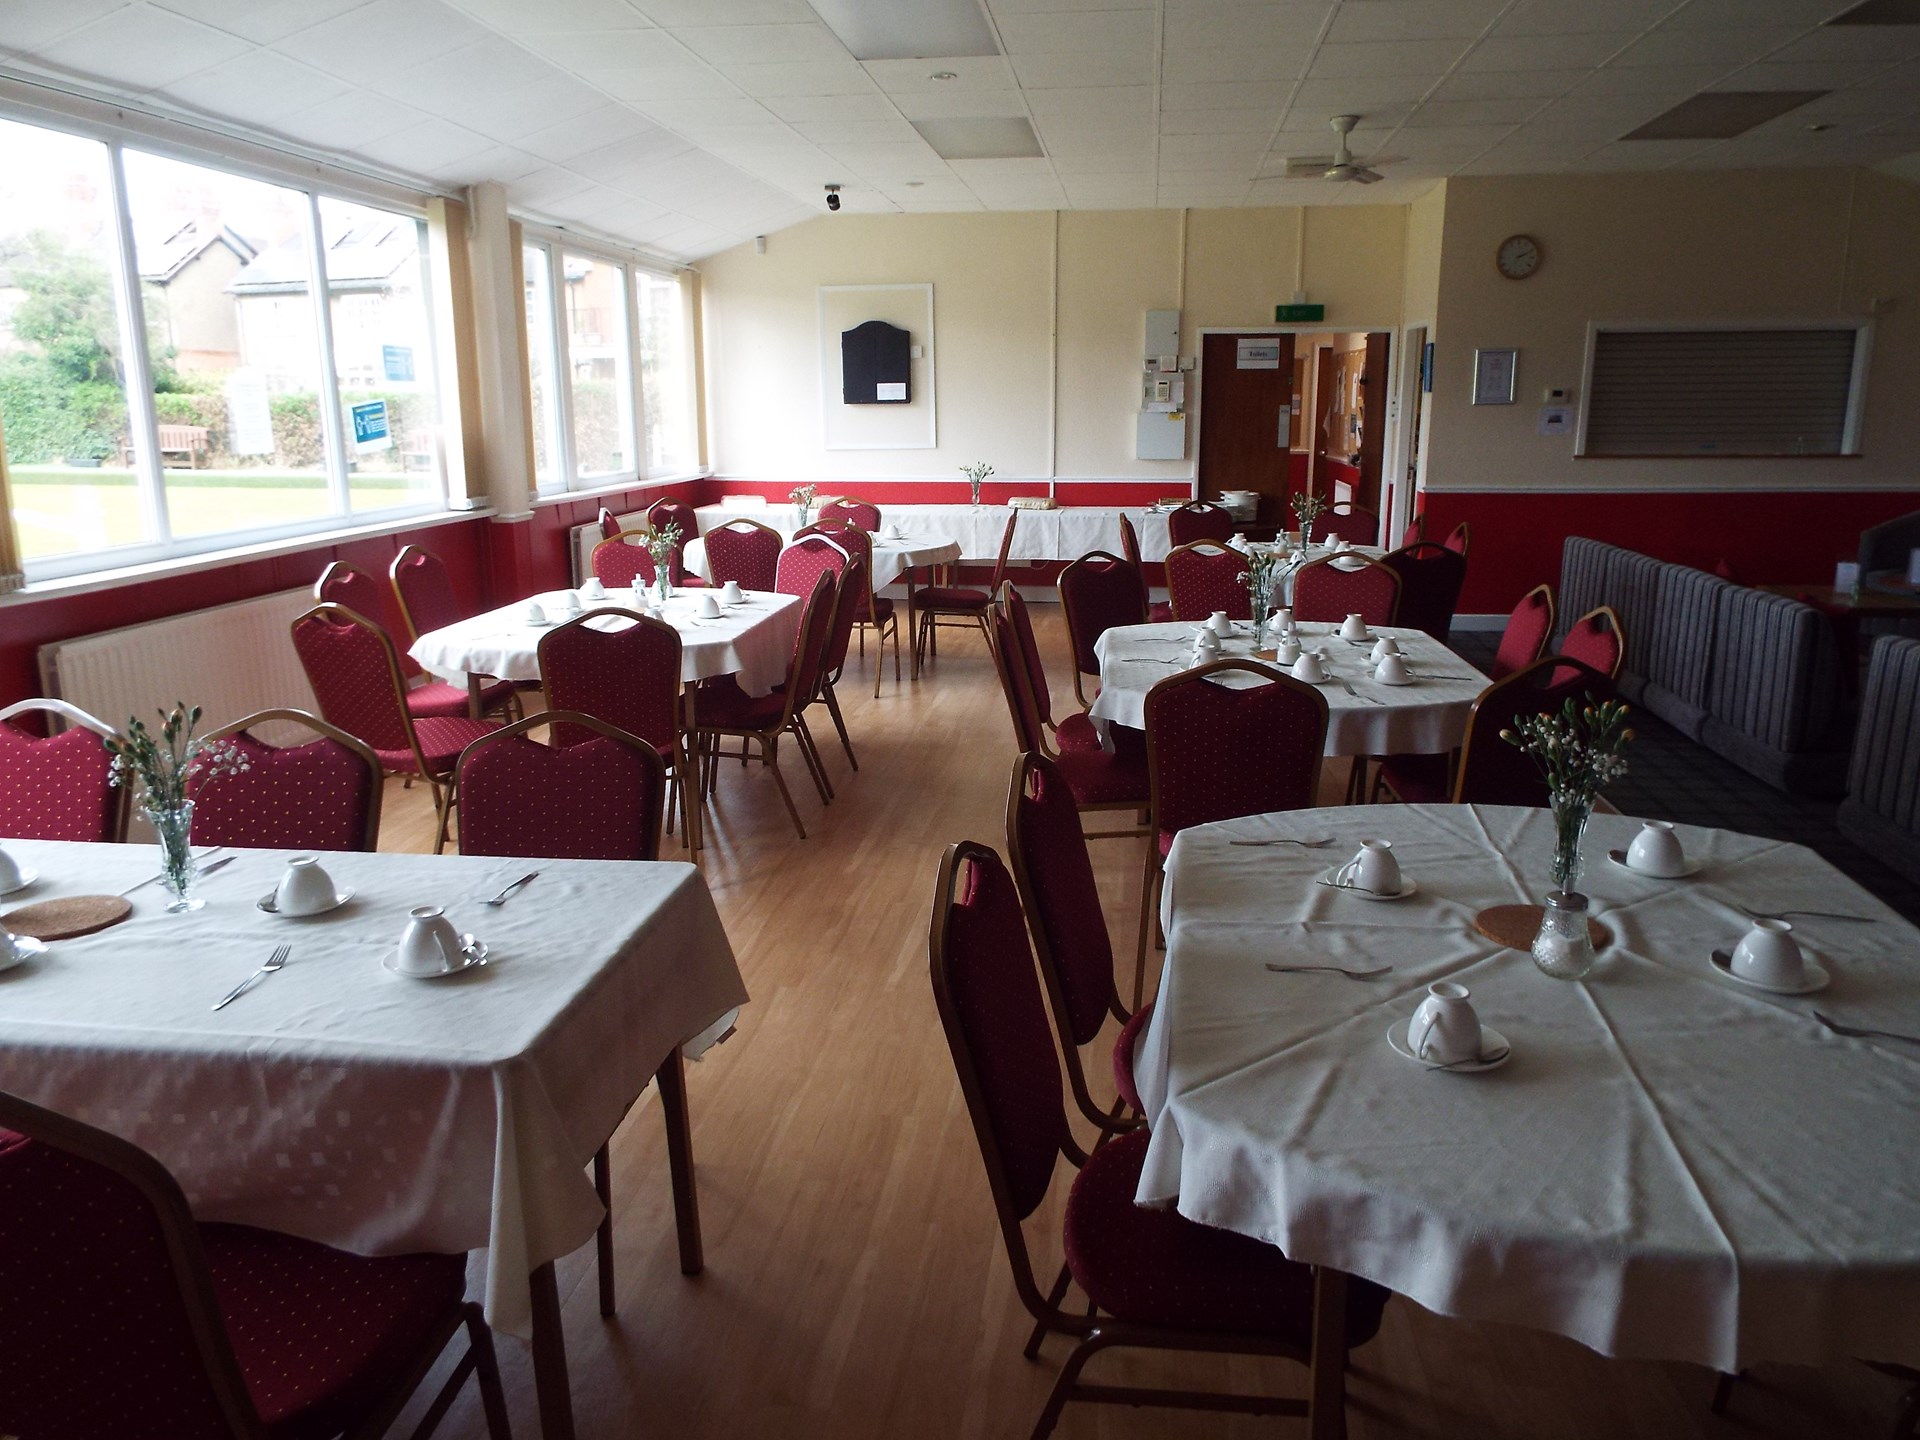 Excellent facilities for room hire party, wake, meetings etc.